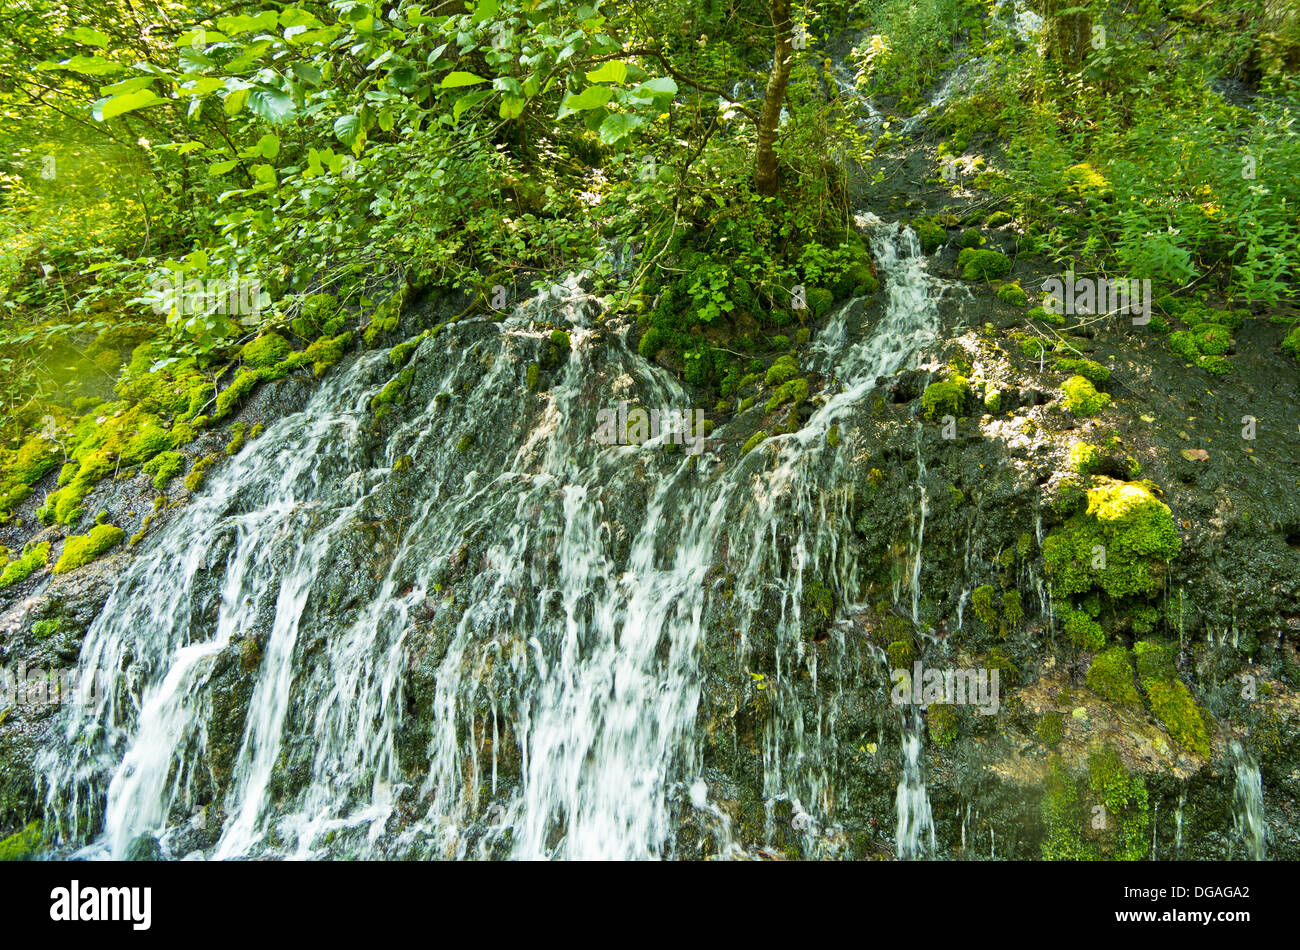 Wellspring with small cascades at Tara mountain and national park Stock Photo